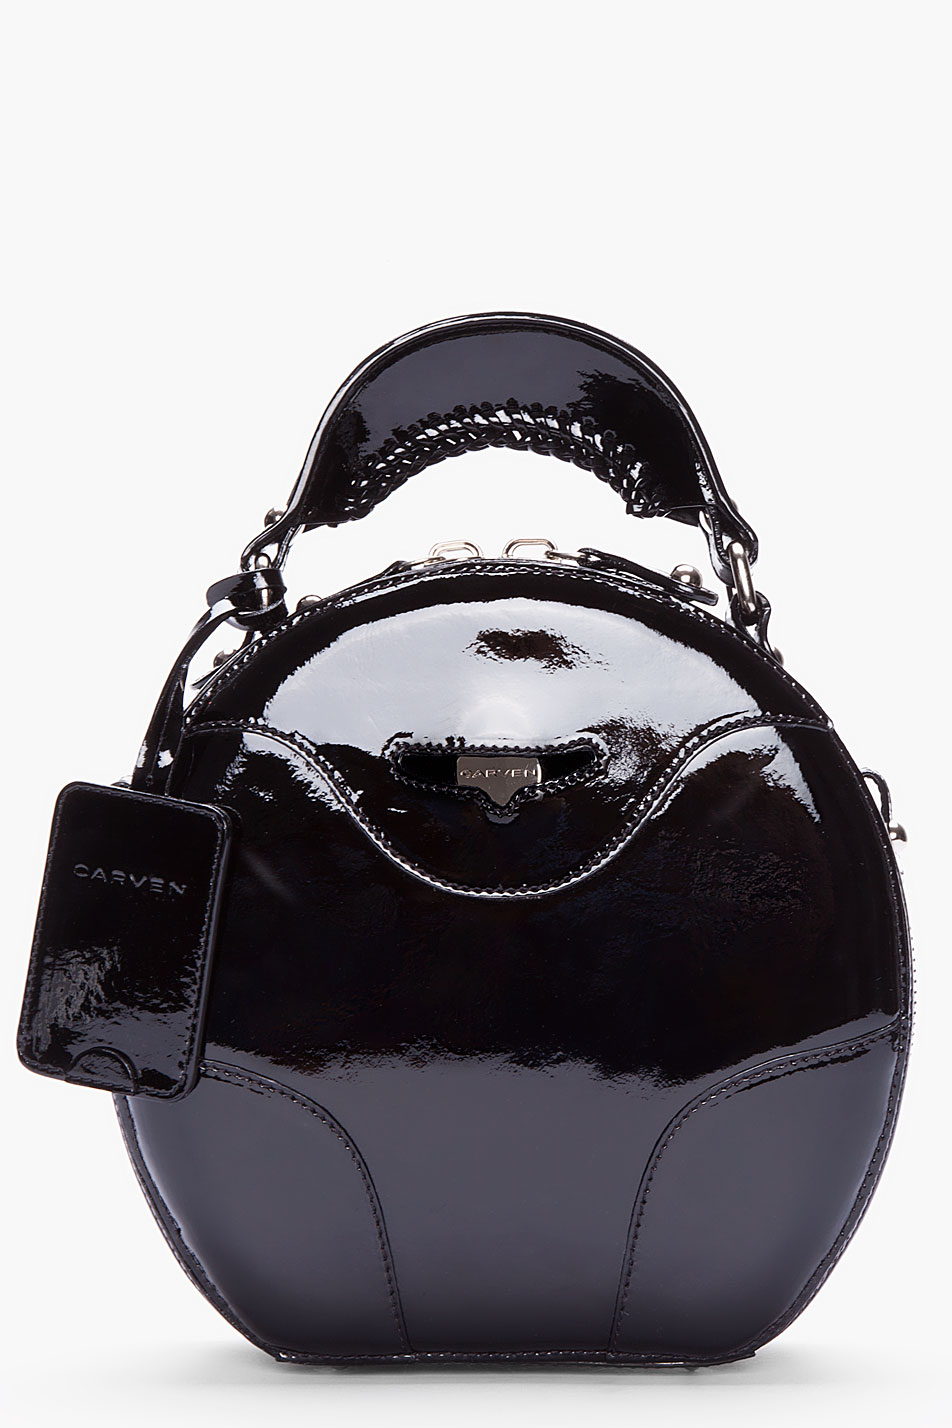 Lyst - Carven Black Patent Leather Round Bag in Black